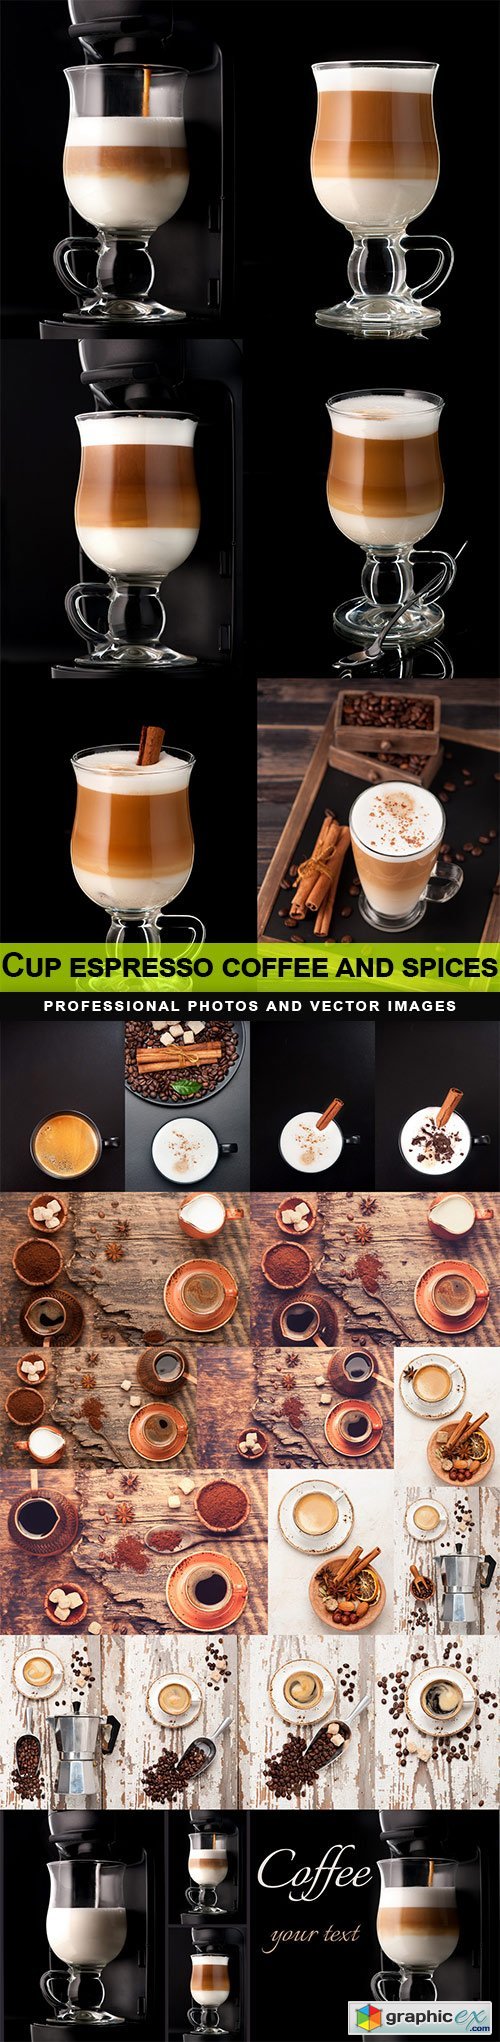 Cup espresso coffee and spices